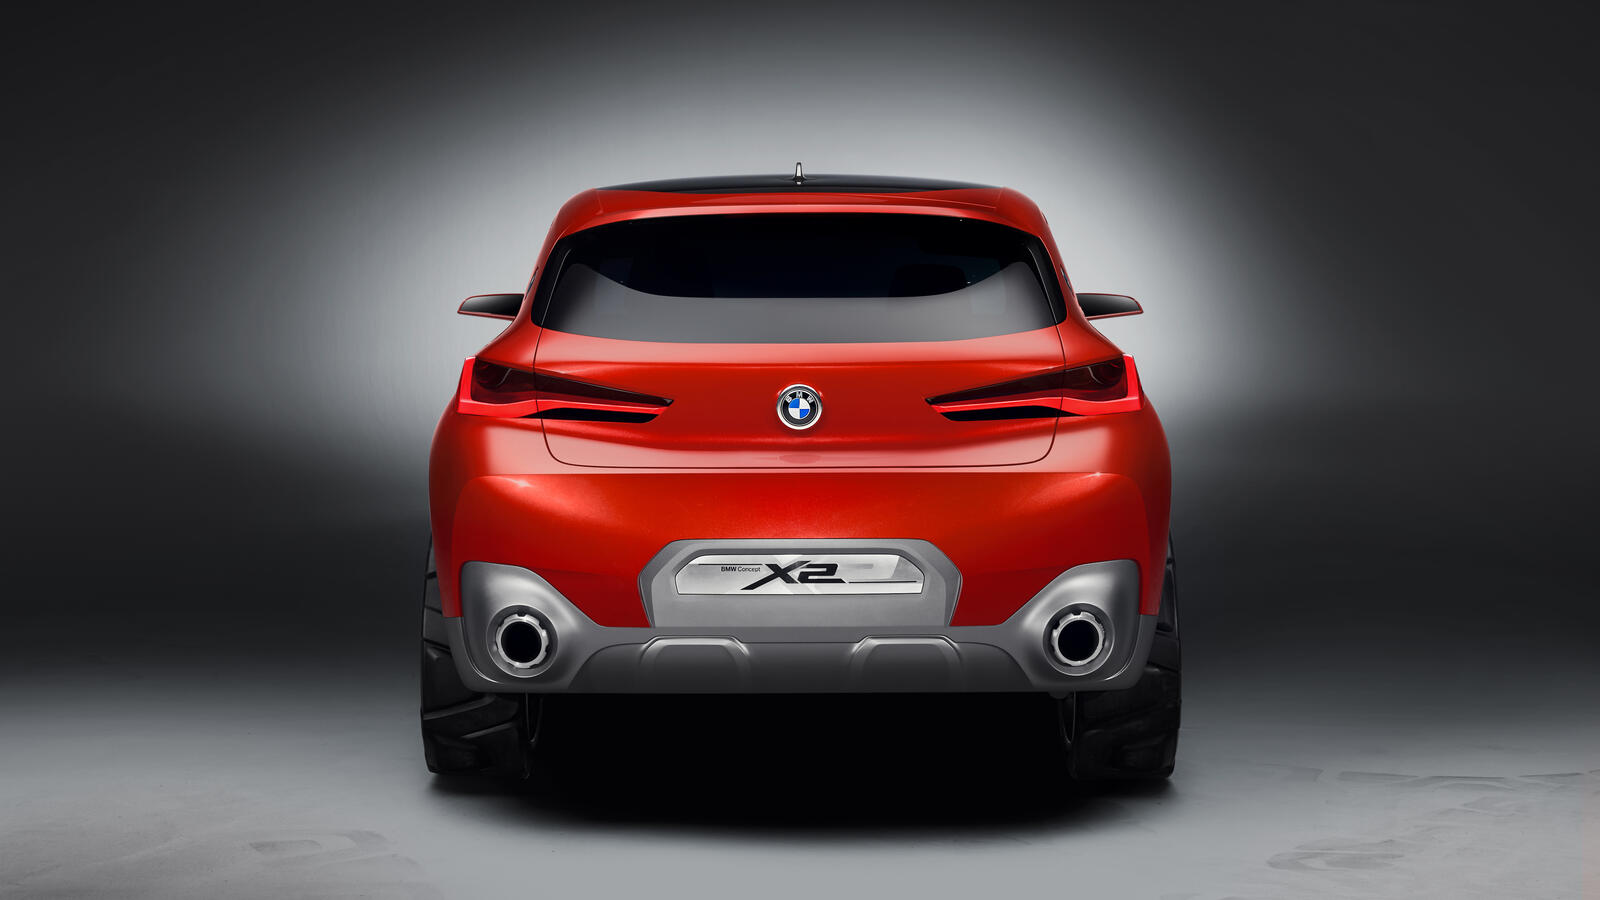 Wallpapers rear end bmw x2 cars on the desktop